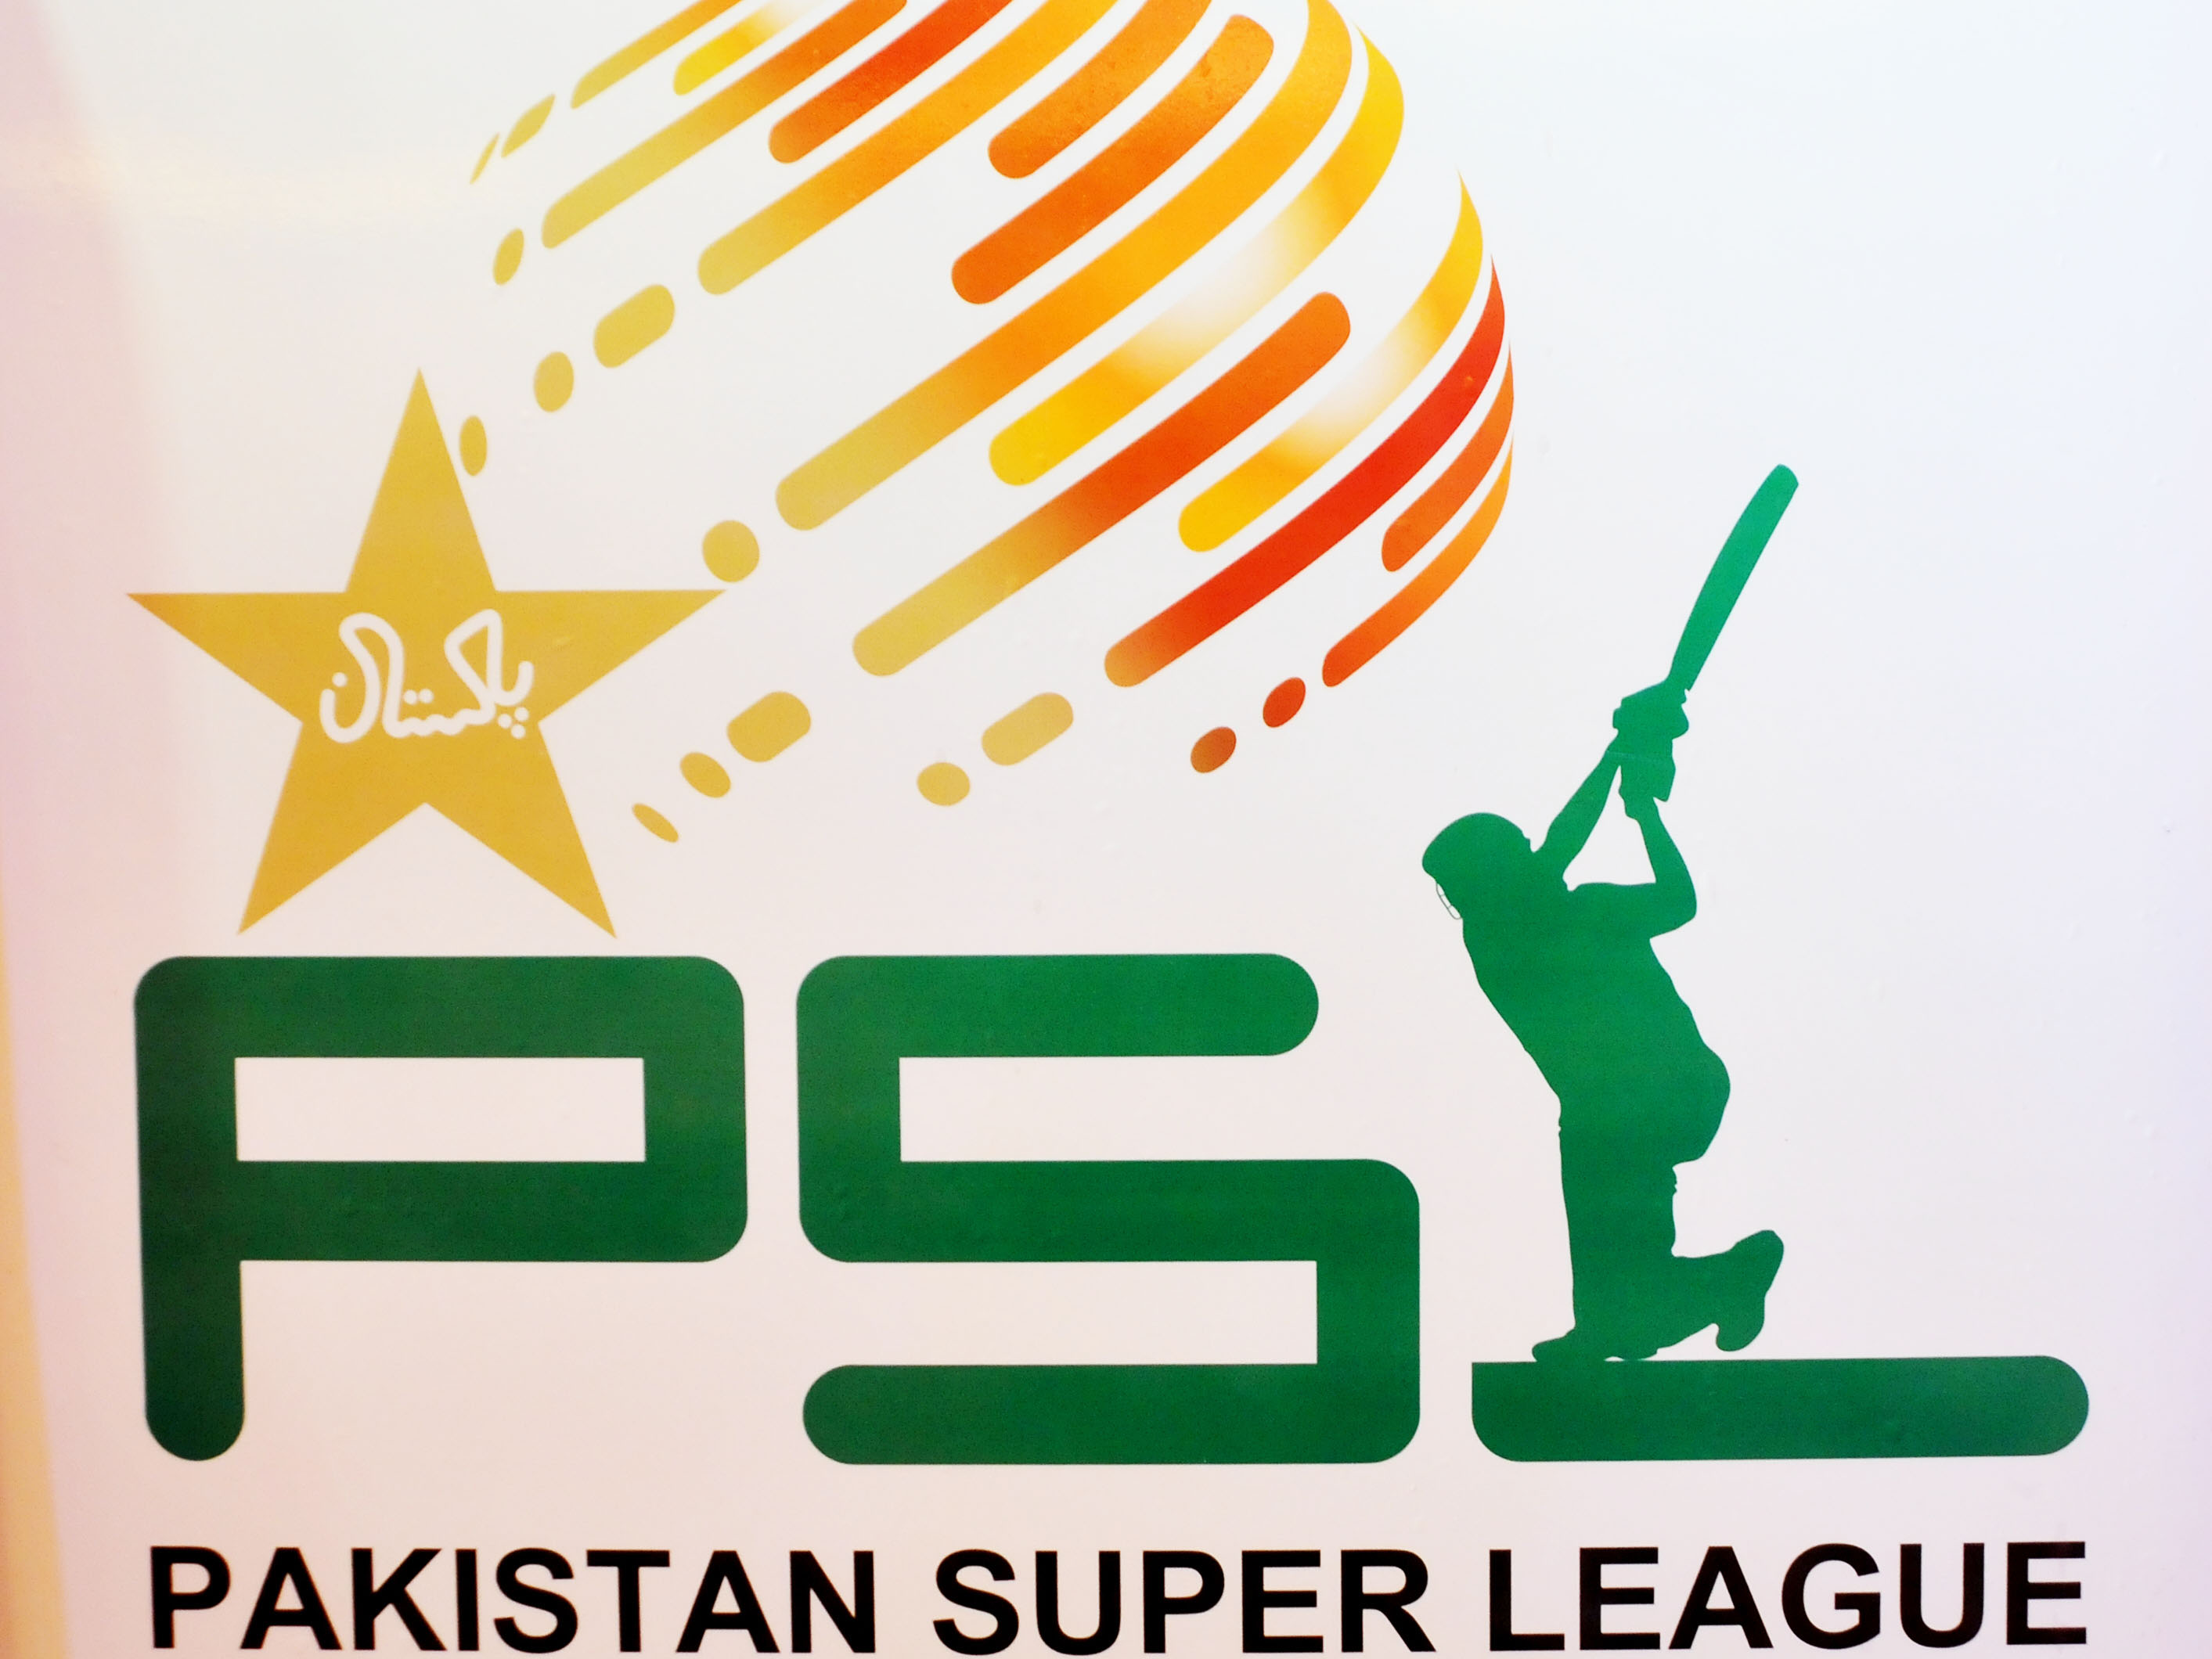 PCB cautious prior to awarding PSL rights